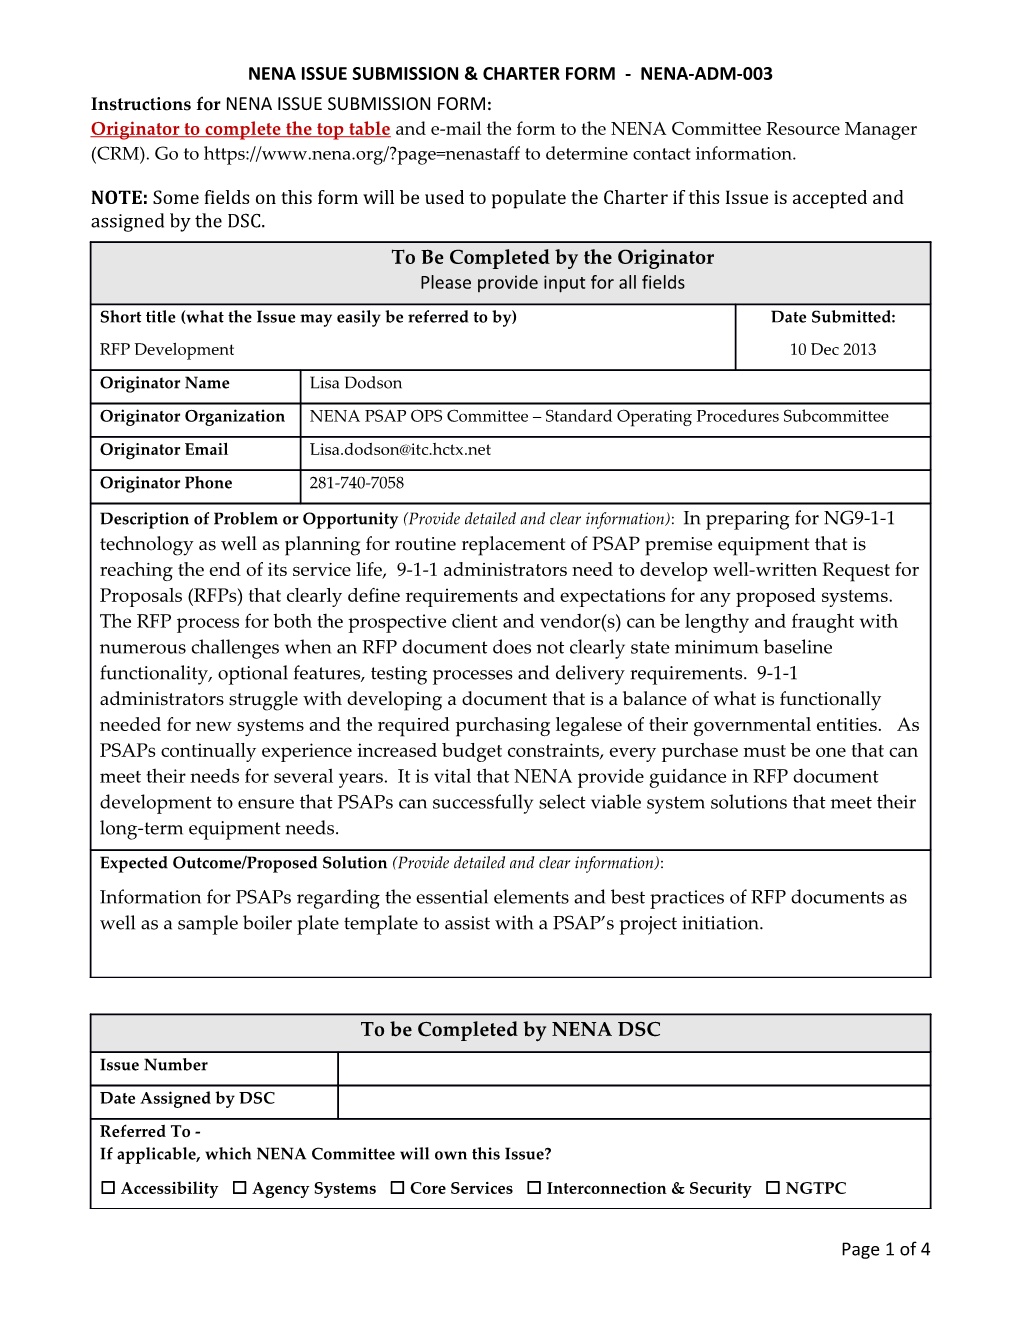 Nena Issue Submission & Charter Form - Nena-Adm-003